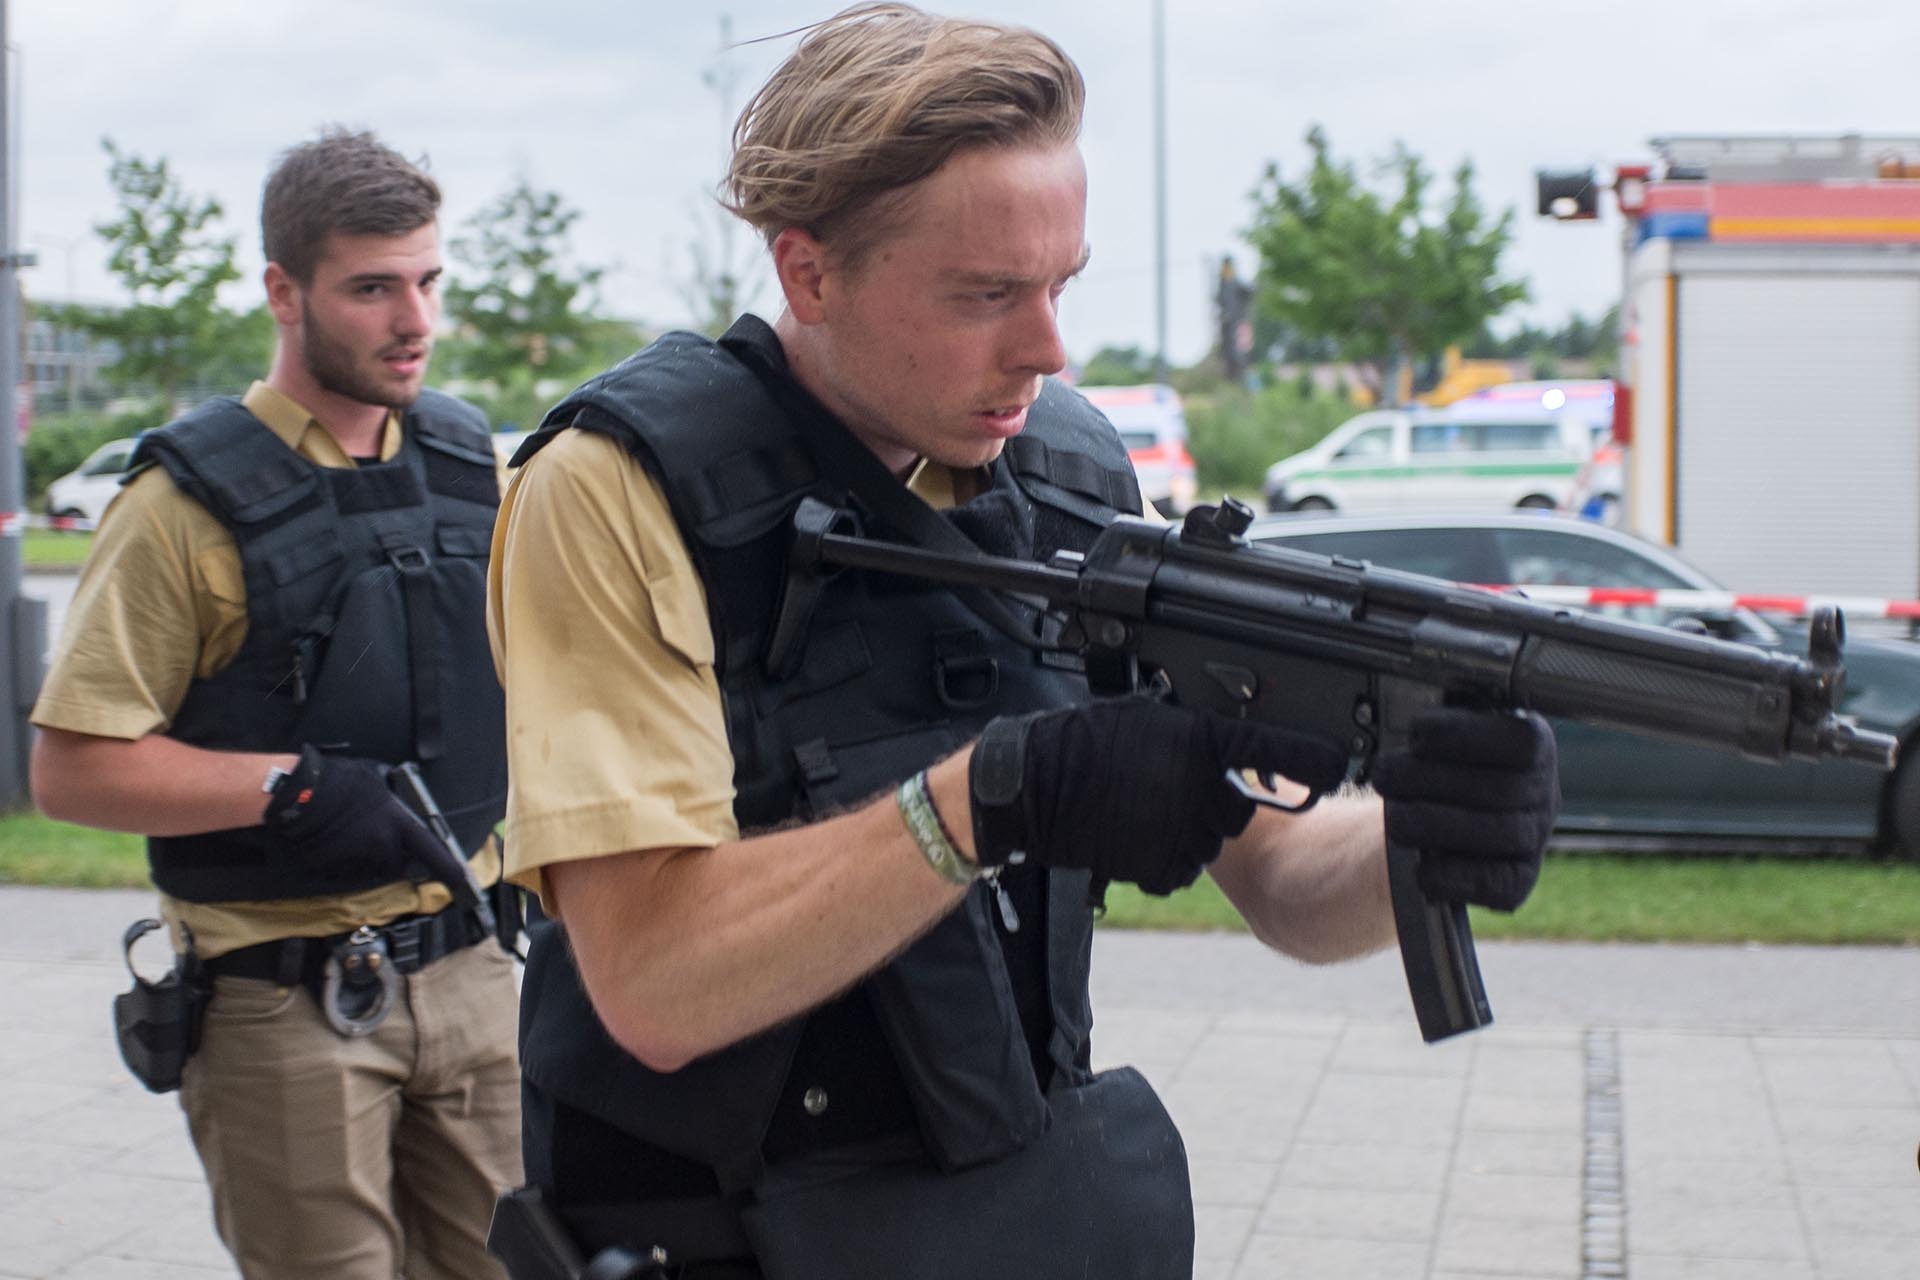 Armed policemen arrive at a shopping centre in which a shooting was reported in Munich, southern Germany, Friday, July 22, 2016. Situation after a shooting in the Olympia shopping centre in Munich is unclear. (Matthias Balk/dpa via AP)